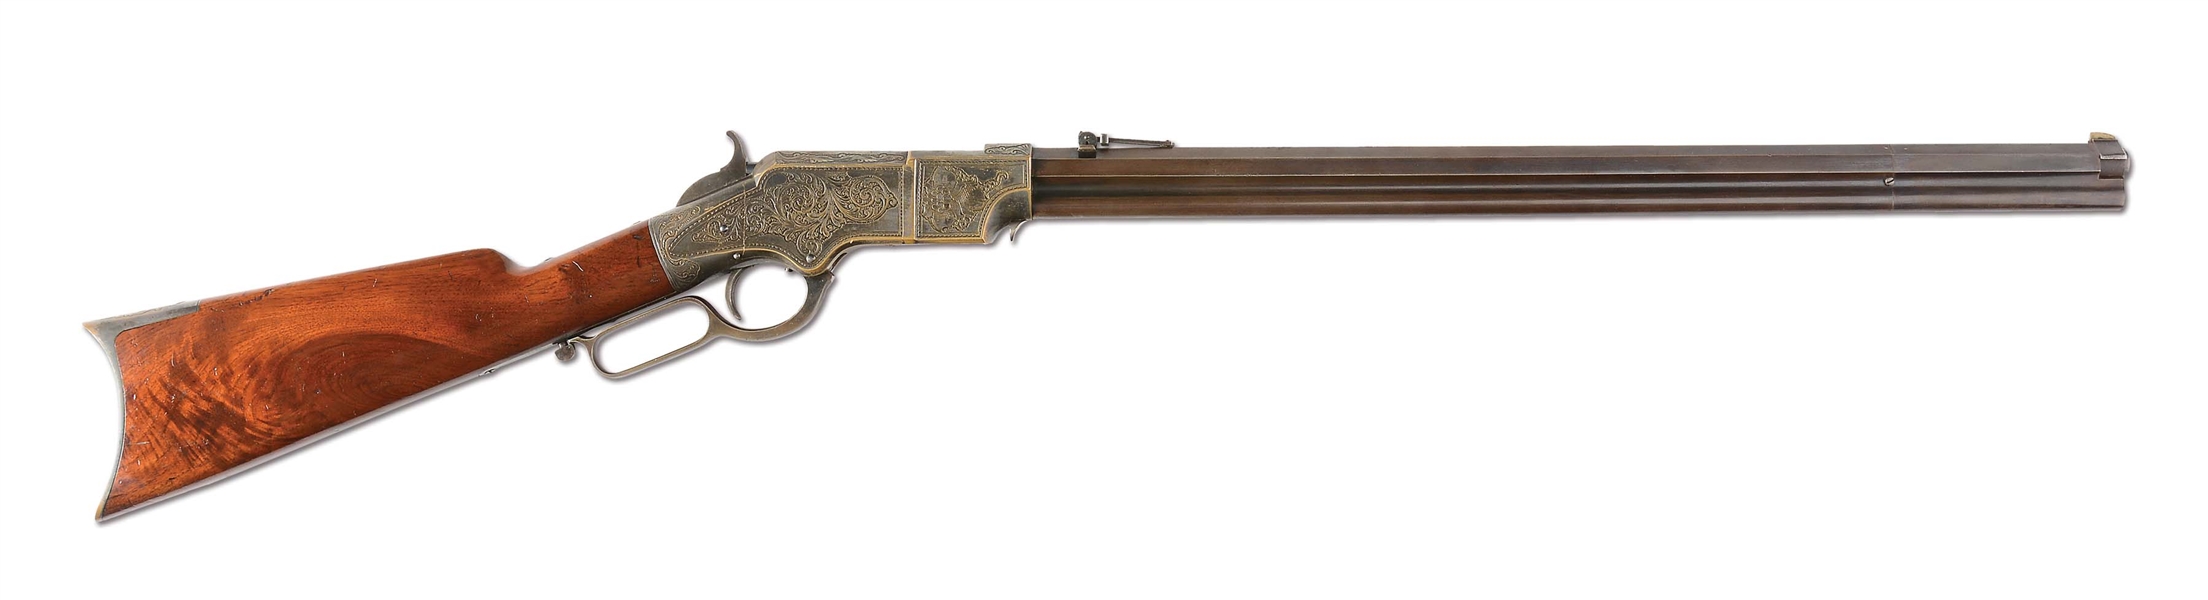 (A) SPECTACULAR HOGGSON ENGRAVED AND SILVER PLATED HENRY RIFLE (1864).